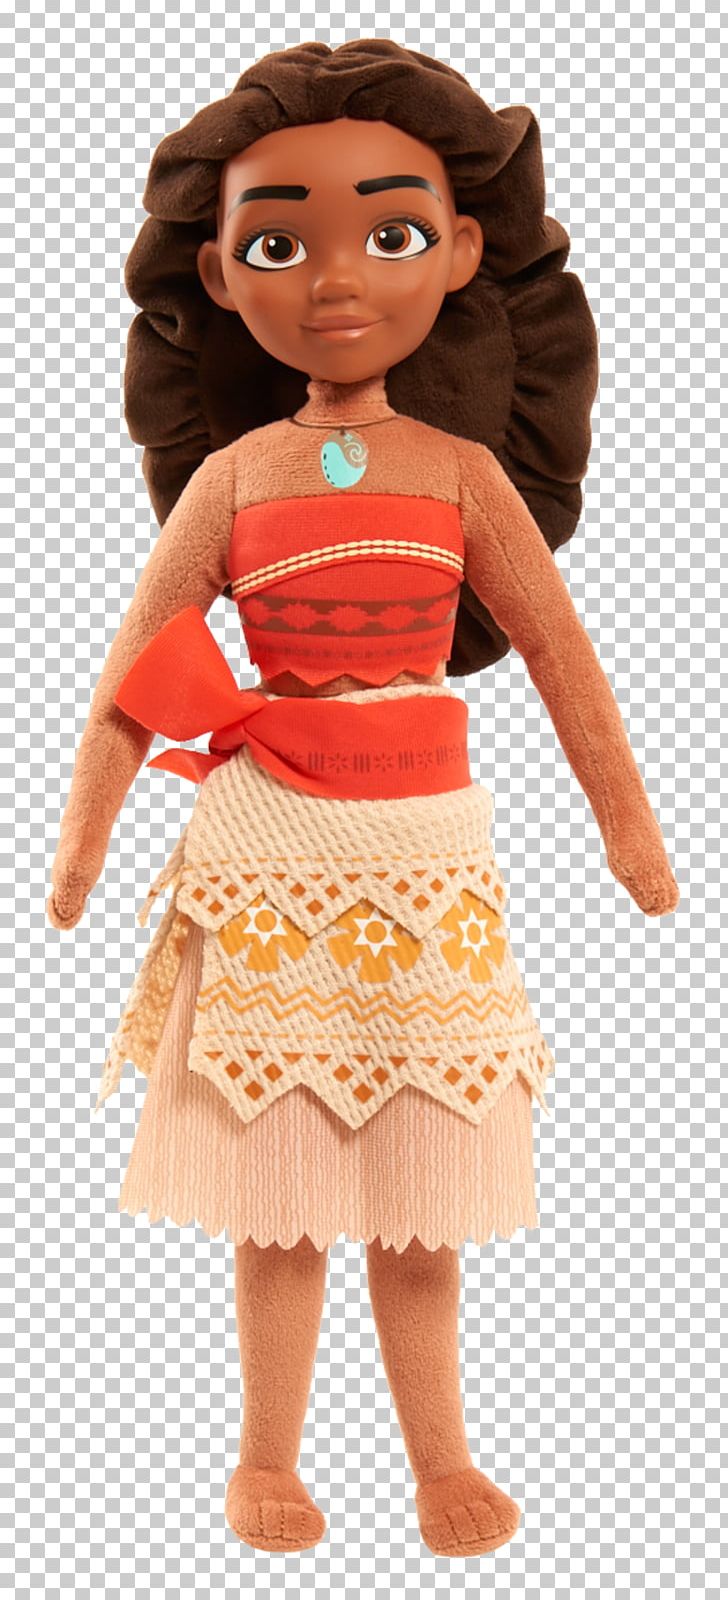 Moana Amazon.com Stuffed Animals & Cuddly Toys Doll PNG, Clipart, Amazon.com, Amazoncom, Amp, Brown Hair, Cuddly Toys Free PNG Download